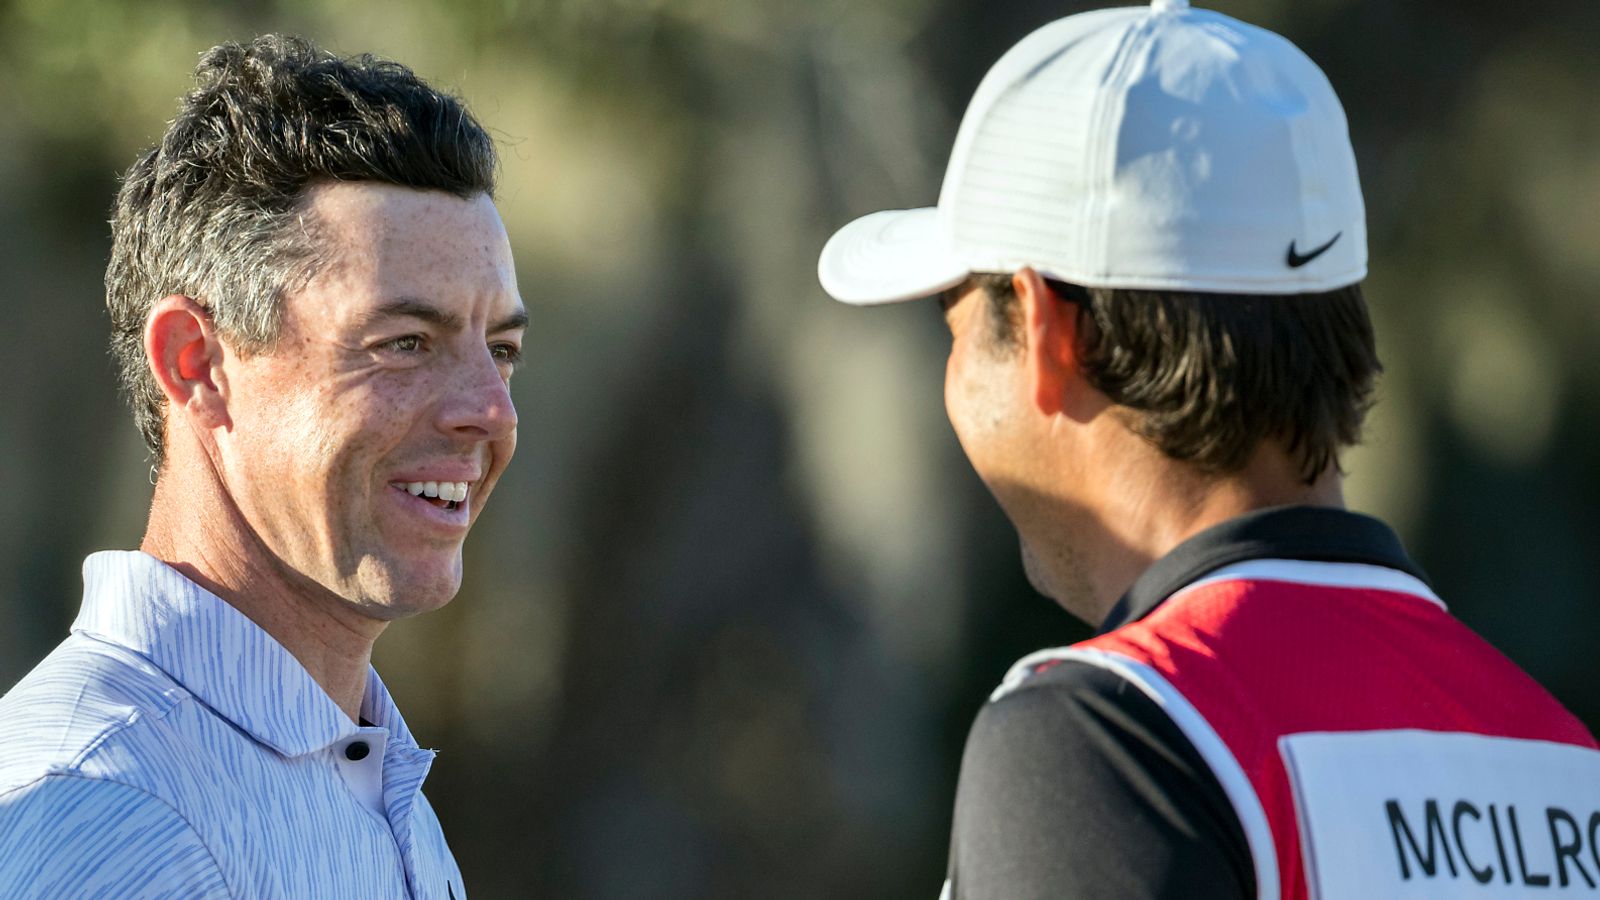 Rory McIlroy’s rise back to world No 1: What will he achieve next after his CJ Cup title defence?